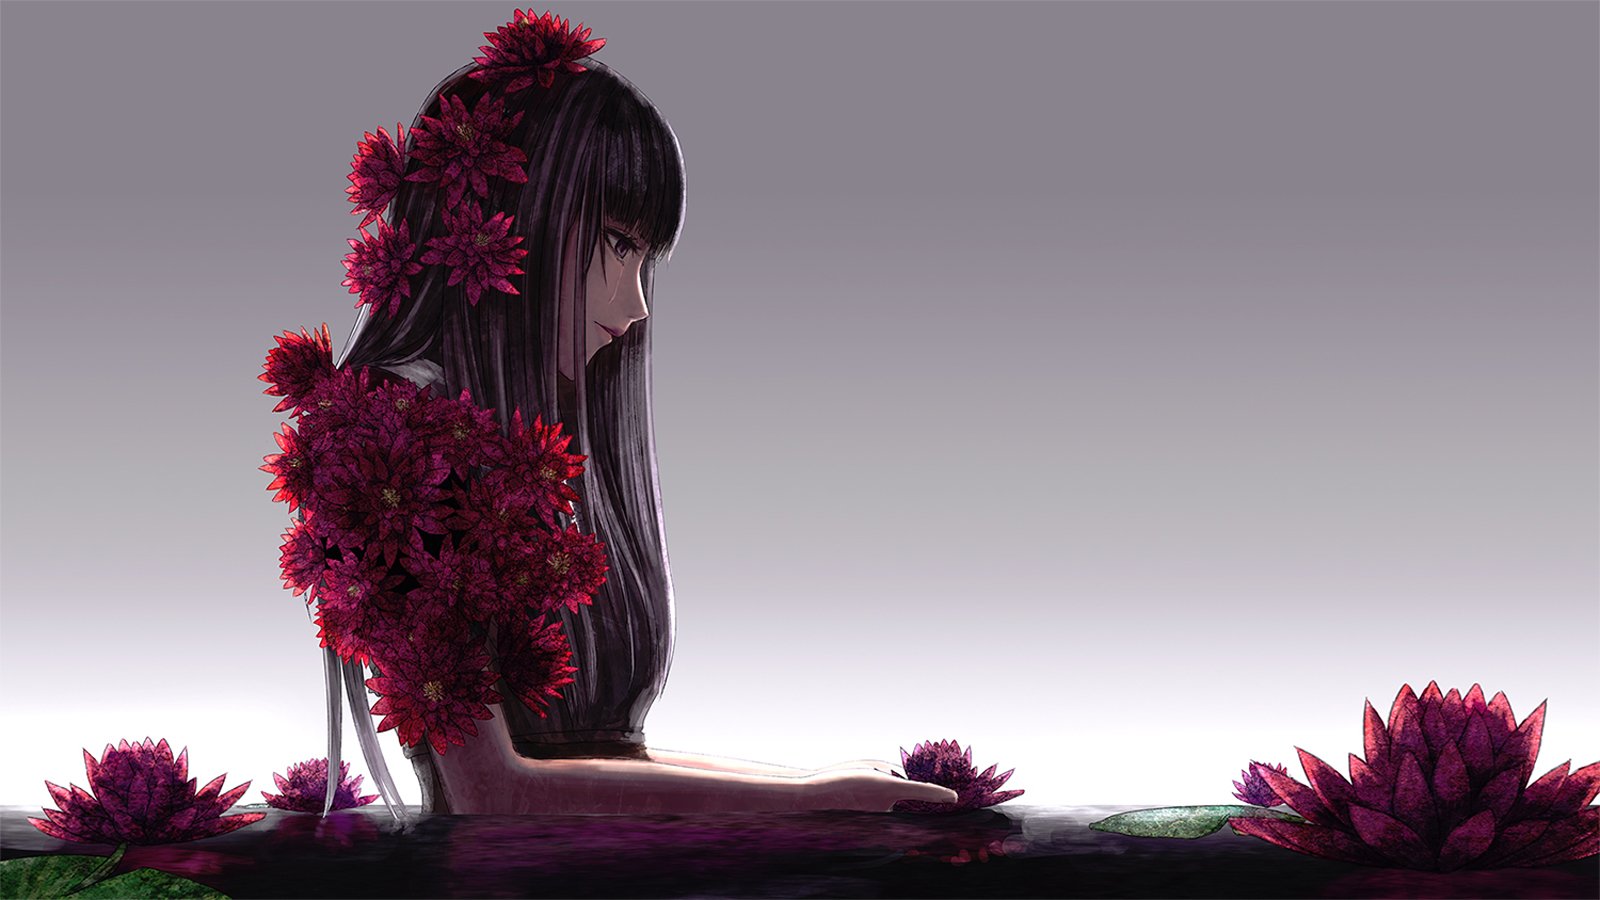 Anime Girl Alone Wallpapers